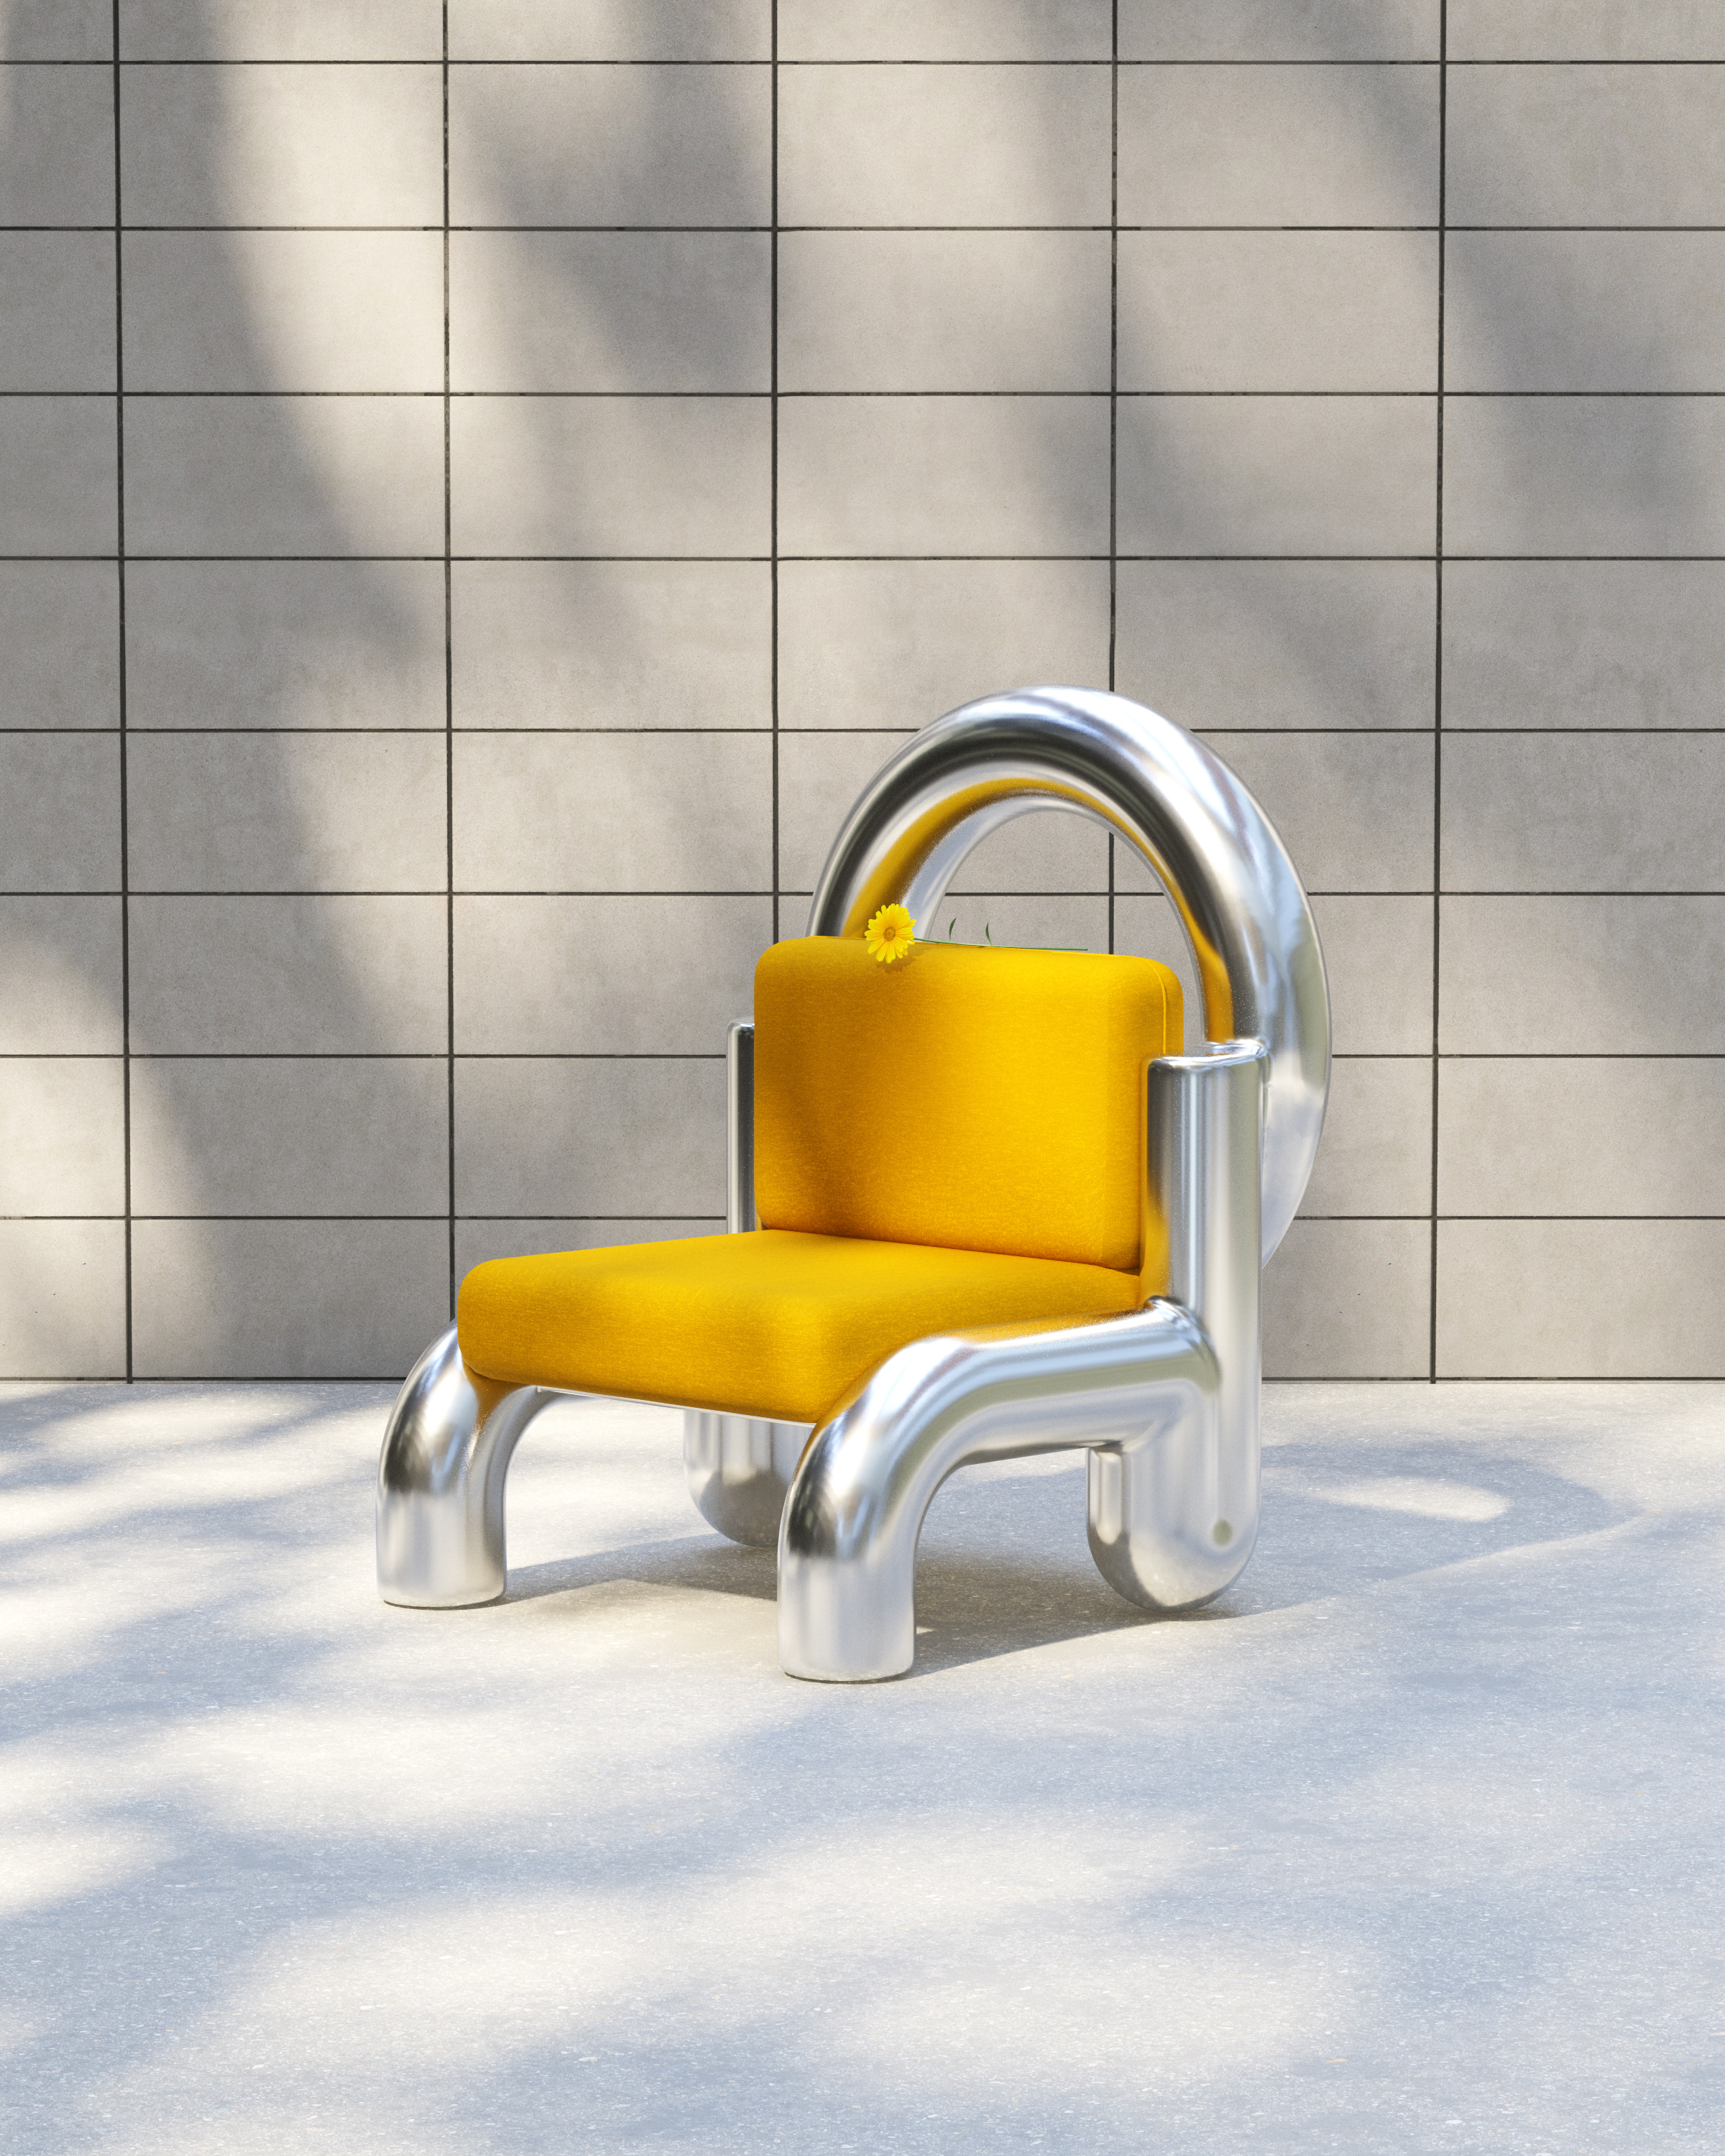 Isolation Chair Image